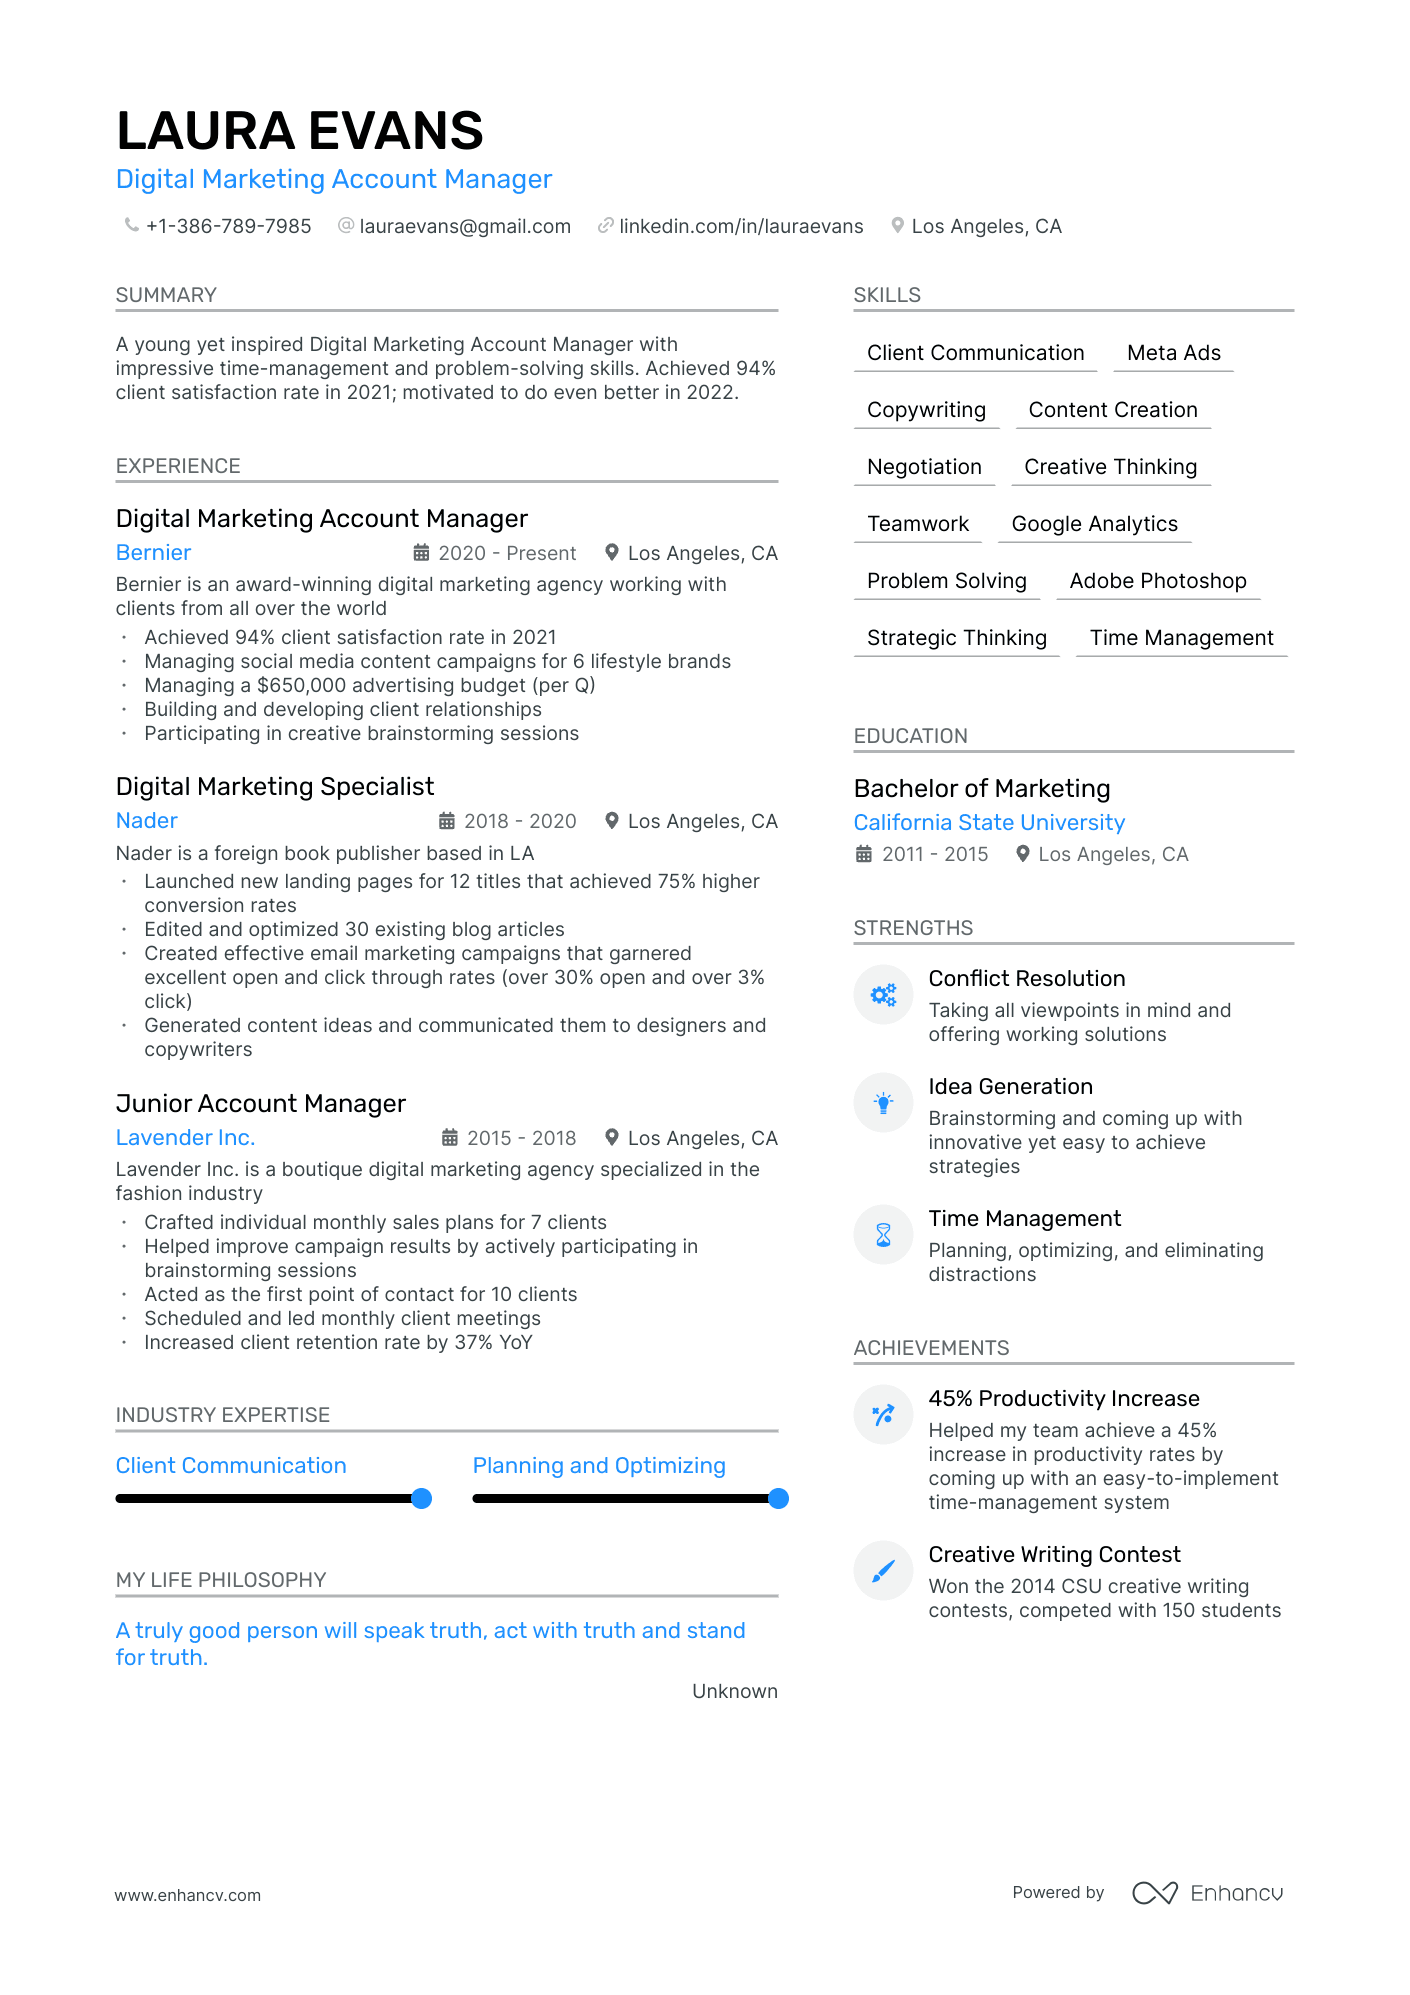 Digital Marketing Account Manager Resume Example